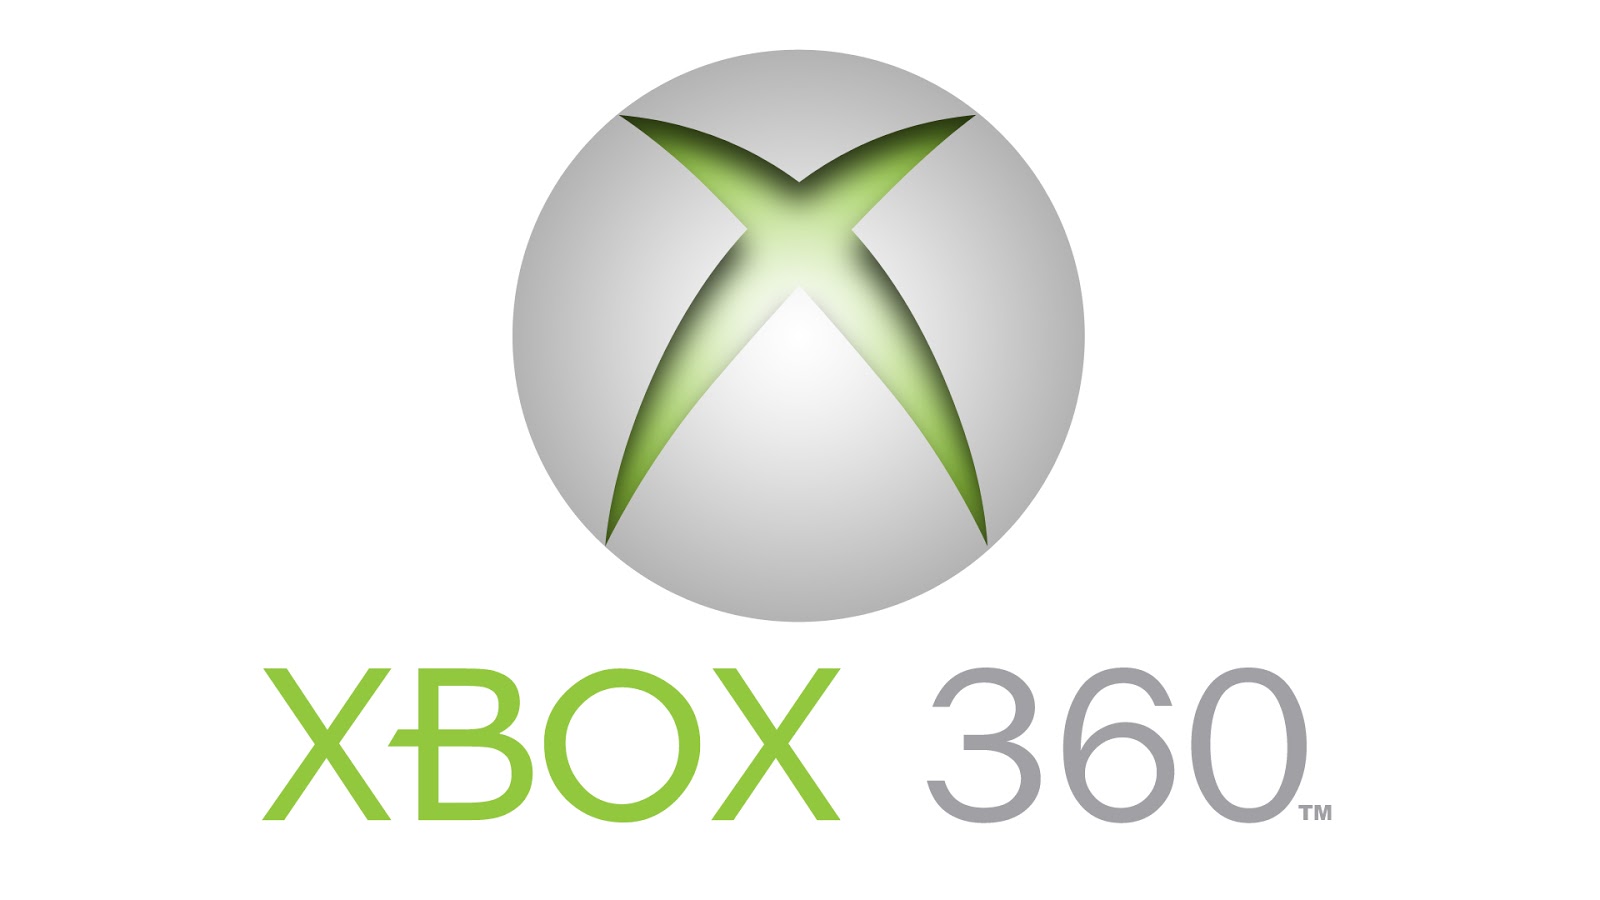 Contributions Of The Xbox 360 In Current And Next Generation Consoles